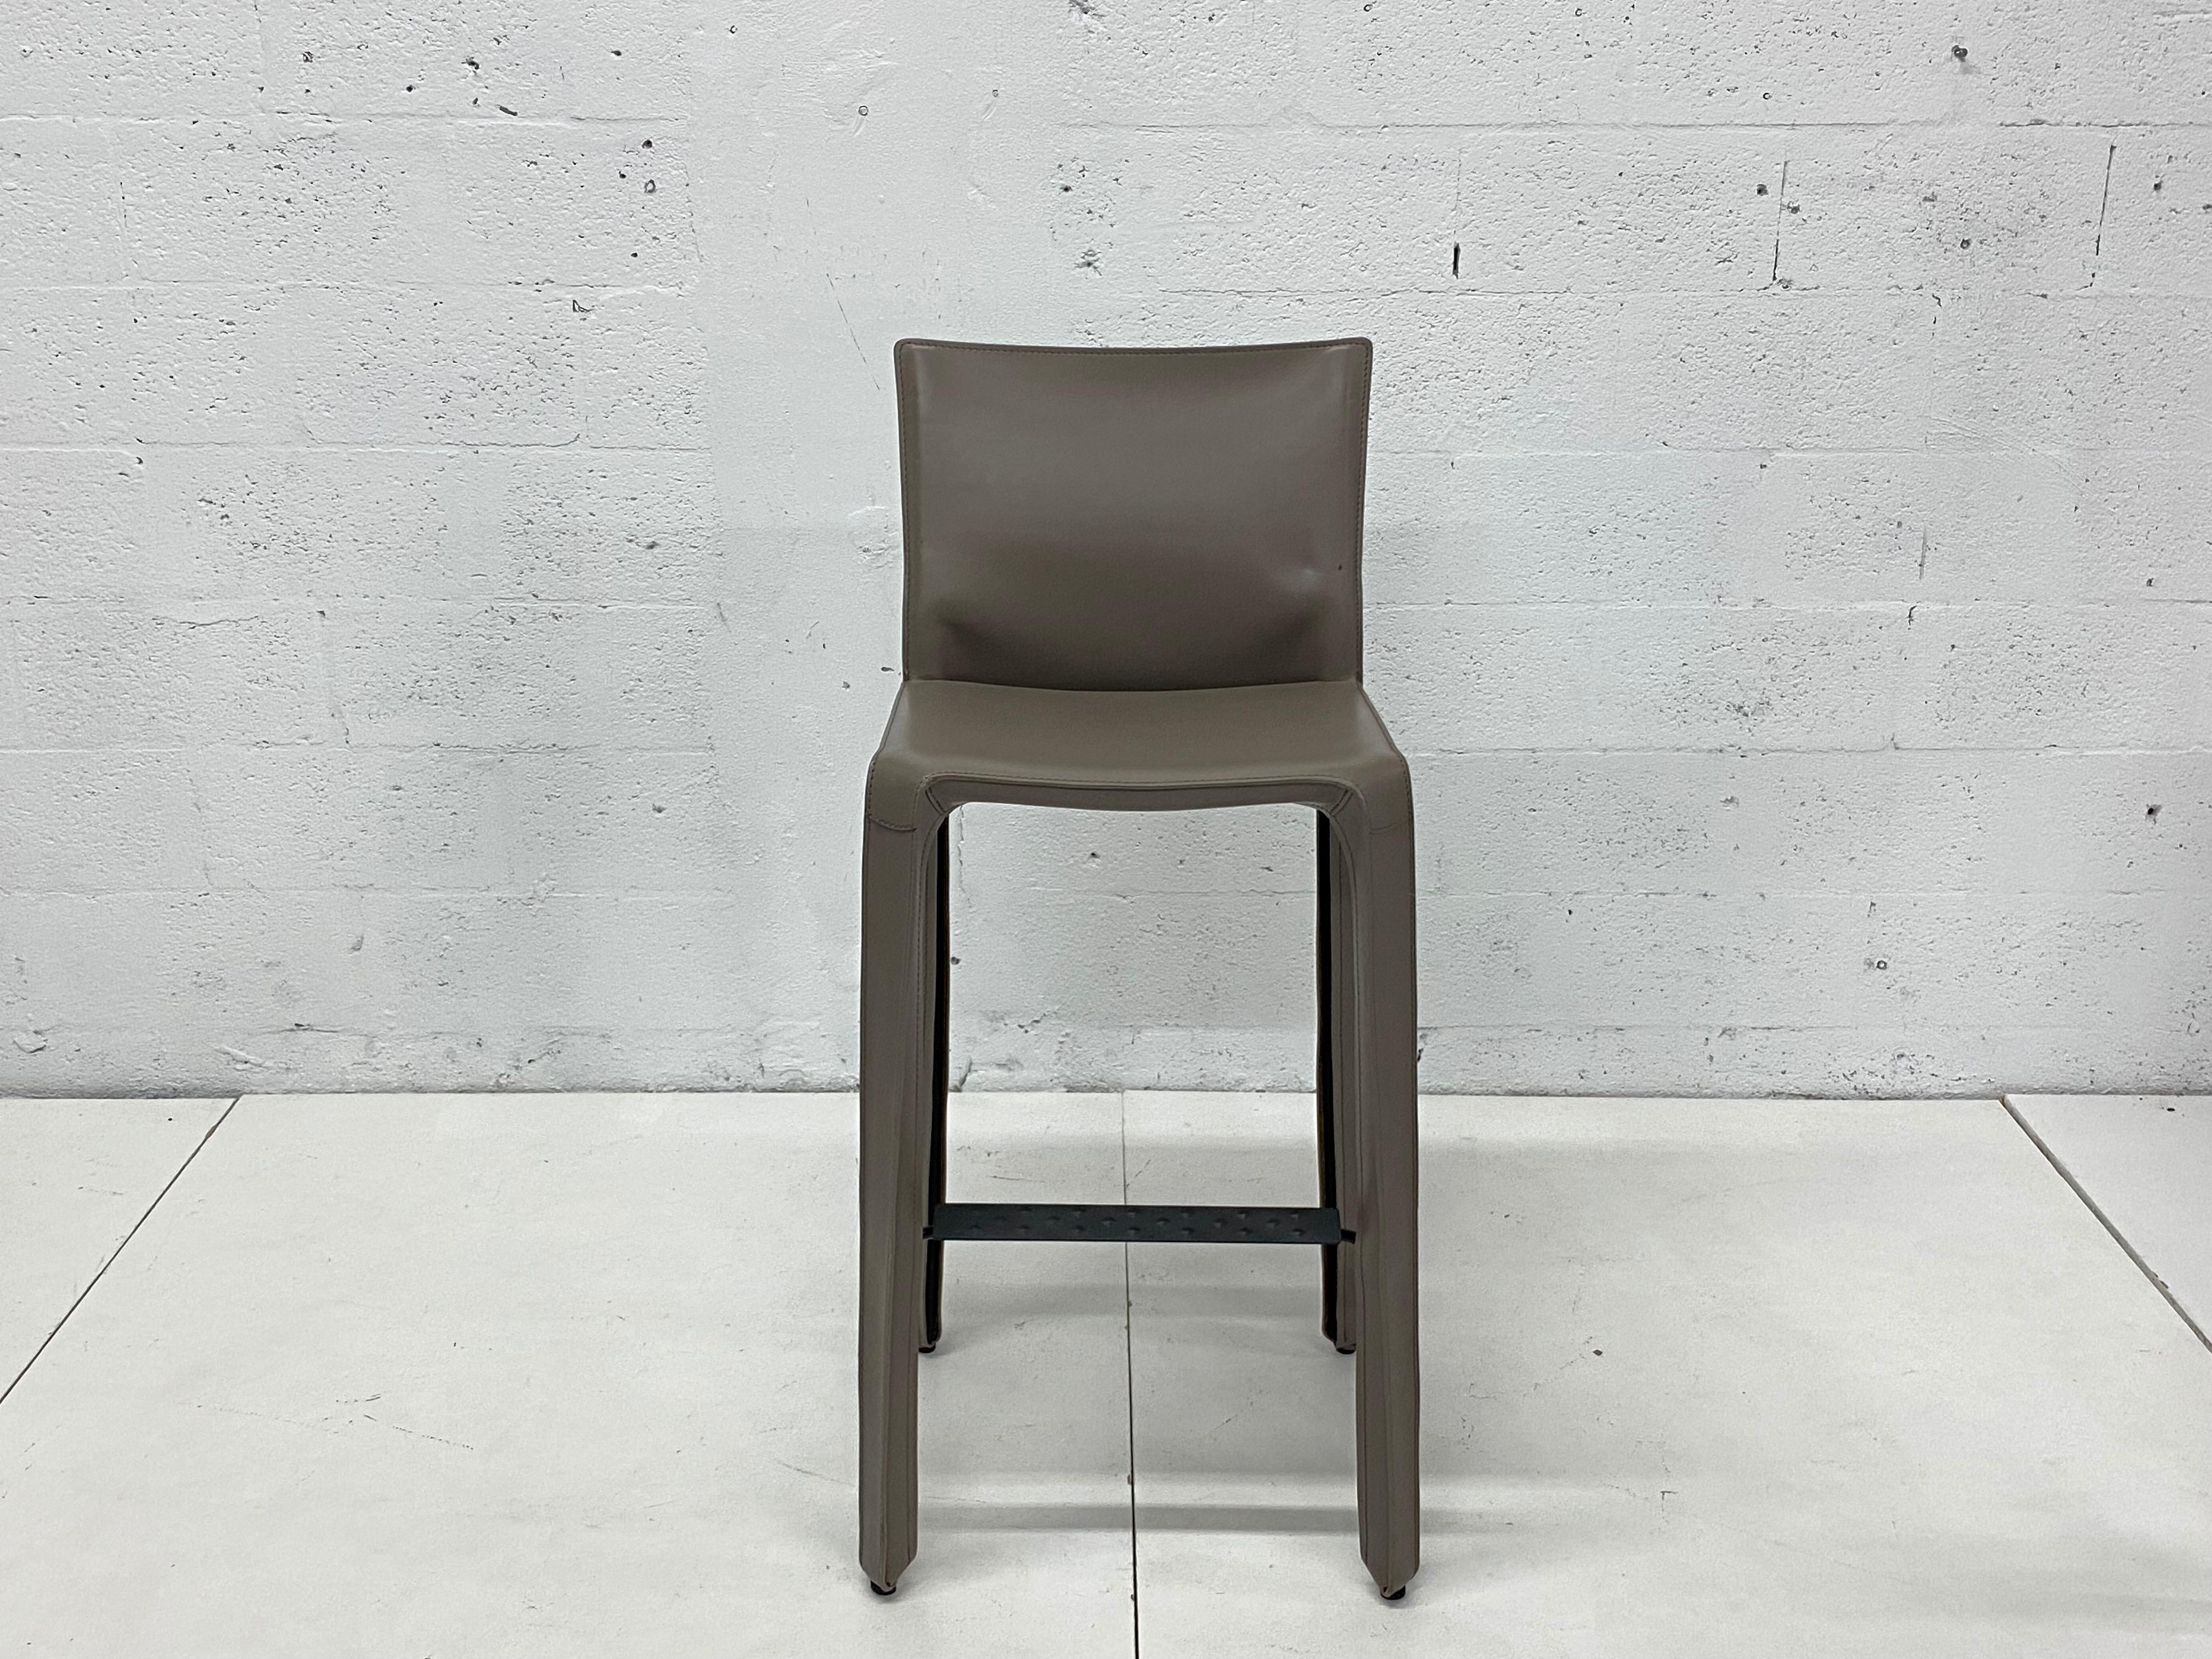 Set of four taupe gray leather bar height stools designed by Mario Bellini for Cassina. 

“This was a new kind of chair, constructed totally out of leather, much cloned since then.” Thus Mario Bellini describes Cab, a best-seller that he designed